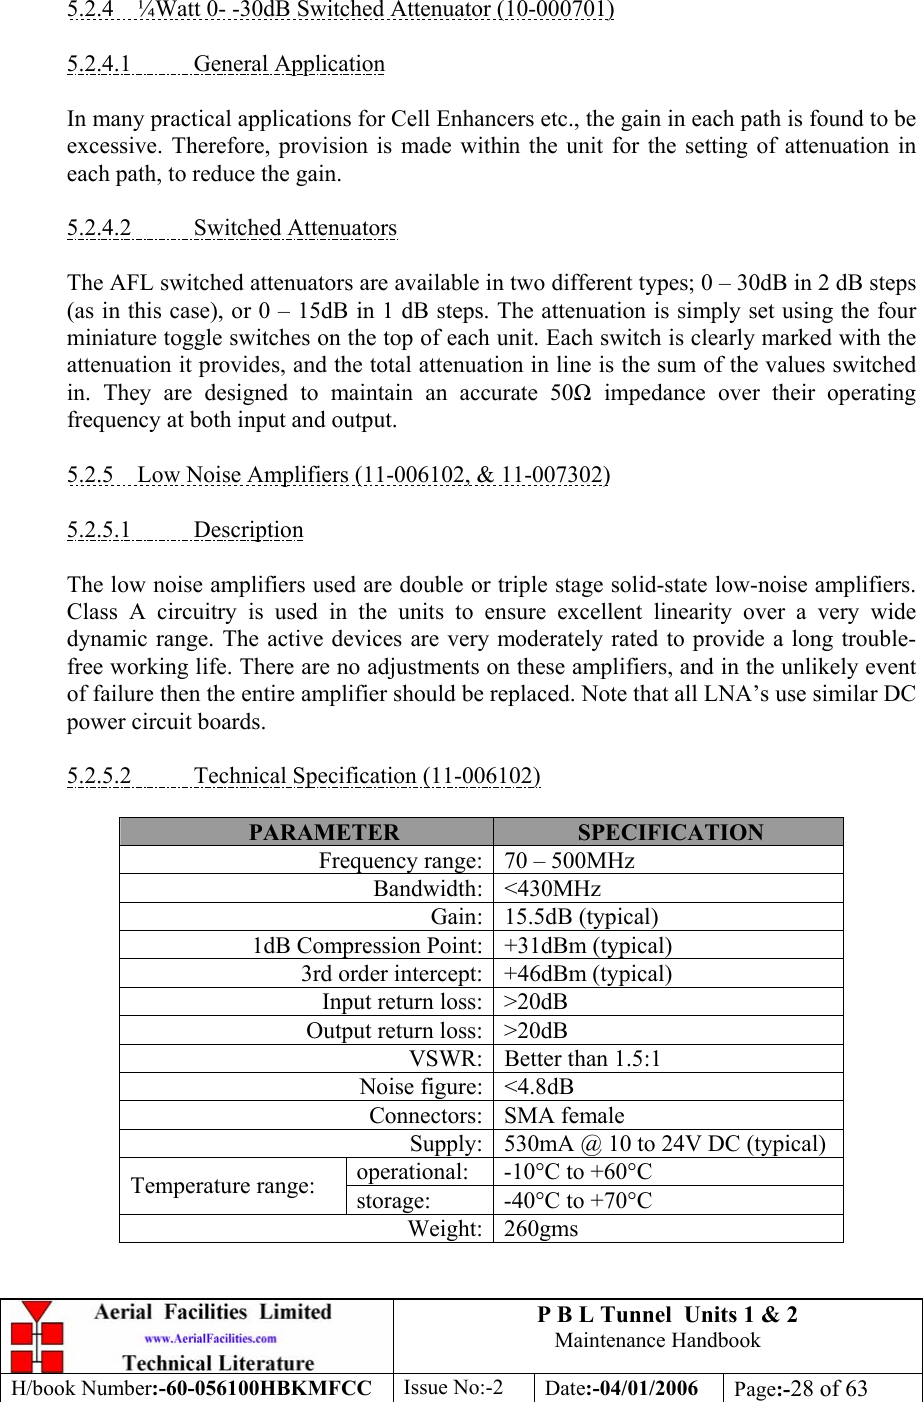 P B L Tunnel  Units 1 &amp; 2 Maintenance Handbook H/book Number:-60-056100HBKMFCC  Issue No:-2  Date:-04/01/2006  Page:-28 of 63   5.2.4  ¼Watt 0- -30dB Switched Attenuator (10-000701)  5.2.4.1 General Application  In many practical applications for Cell Enhancers etc., the gain in each path is found to be excessive. Therefore, provision is made within the unit for the setting of attenuation in each path, to reduce the gain.  5.2.4.2 Switched Attenuators  The AFL switched attenuators are available in two different types; 0 – 30dB in 2 dB steps (as in this case), or 0 – 15dB in 1 dB steps. The attenuation is simply set using the four miniature toggle switches on the top of each unit. Each switch is clearly marked with the attenuation it provides, and the total attenuation in line is the sum of the values switched in. They are designed to maintain an accurate 50 impedance over their operating frequency at both input and output.  5.2.5  Low Noise Amplifiers (11-006102, &amp; 11-007302)  5.2.5.1 Description  The low noise amplifiers used are double or triple stage solid-state low-noise amplifiers. Class A circuitry is used in the units to ensure excellent linearity over a very wide dynamic range. The active devices are very moderately rated to provide a long trouble-free working life. There are no adjustments on these amplifiers, and in the unlikely event of failure then the entire amplifier should be replaced. Note that all LNA’s use similar DC power circuit boards.  5.2.5.2  Technical Specification (11-006102)  PARAMETER  SPECIFICATION Frequency range: 70 – 500MHz Bandwidth: &lt;430MHz Gain: 15.5dB (typical) 1dB Compression Point: +31dBm (typical) 3rd order intercept: +46dBm (typical) Input return loss: &gt;20dB Output return loss: &gt;20dB VSWR: Better than 1.5:1 Noise figure: &lt;4.8dB Connectors: SMA female Supply: 530mA @ 10 to 24V DC (typical) operational: -10°C to +60°C Temperature range:  storage: -40°C to +70°C Weight: 260gms 